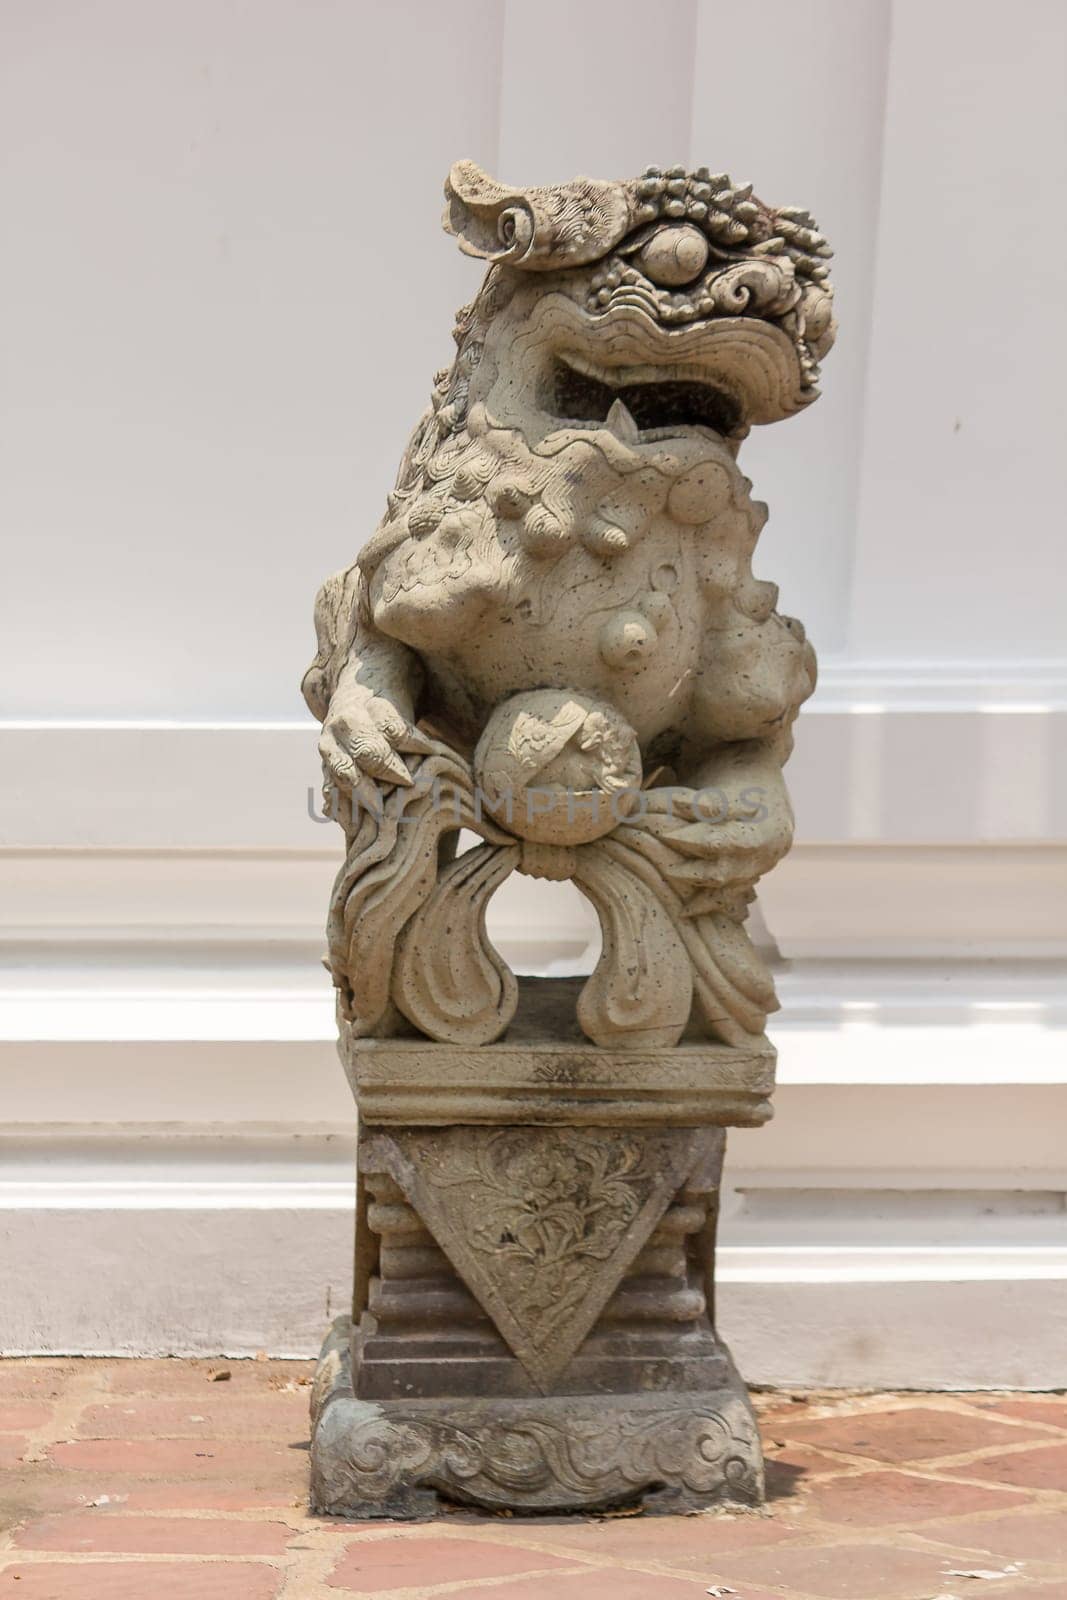 The lion-shaped stone carved in Chinese style